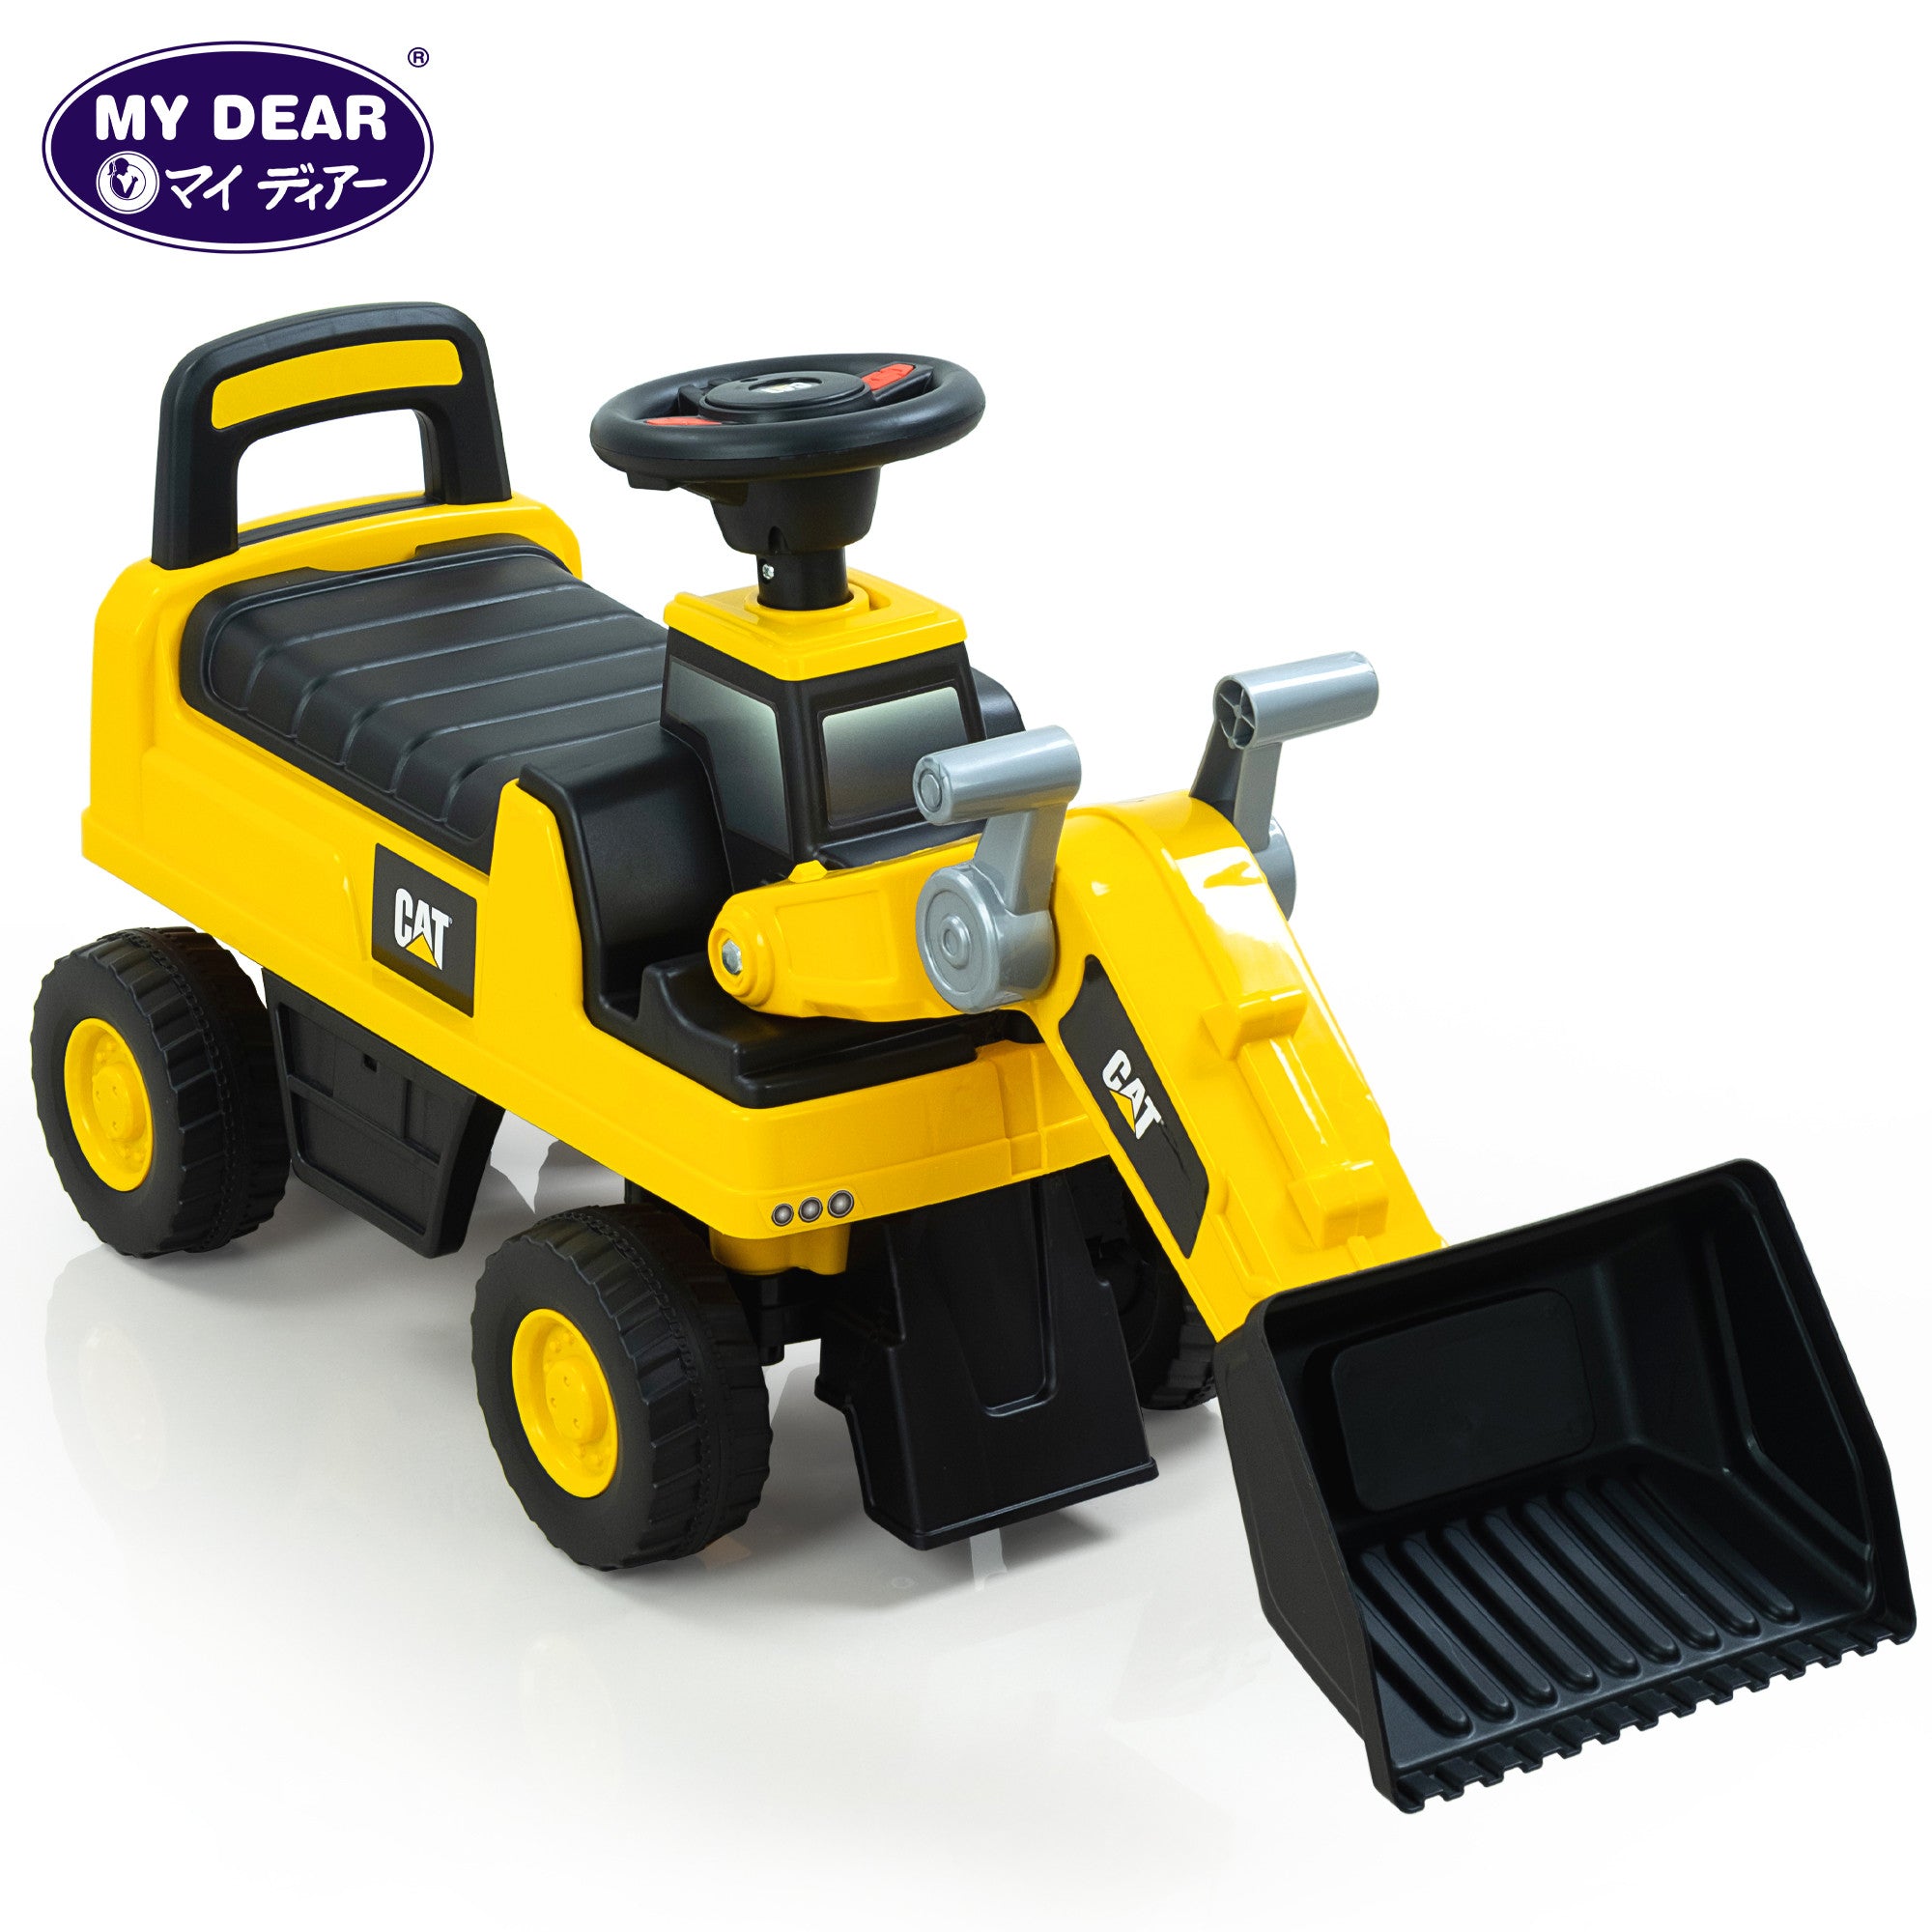 My Dear Ride On Car 23113 CAT Loader With Front Loader, Steering Horn & Storage Compartment